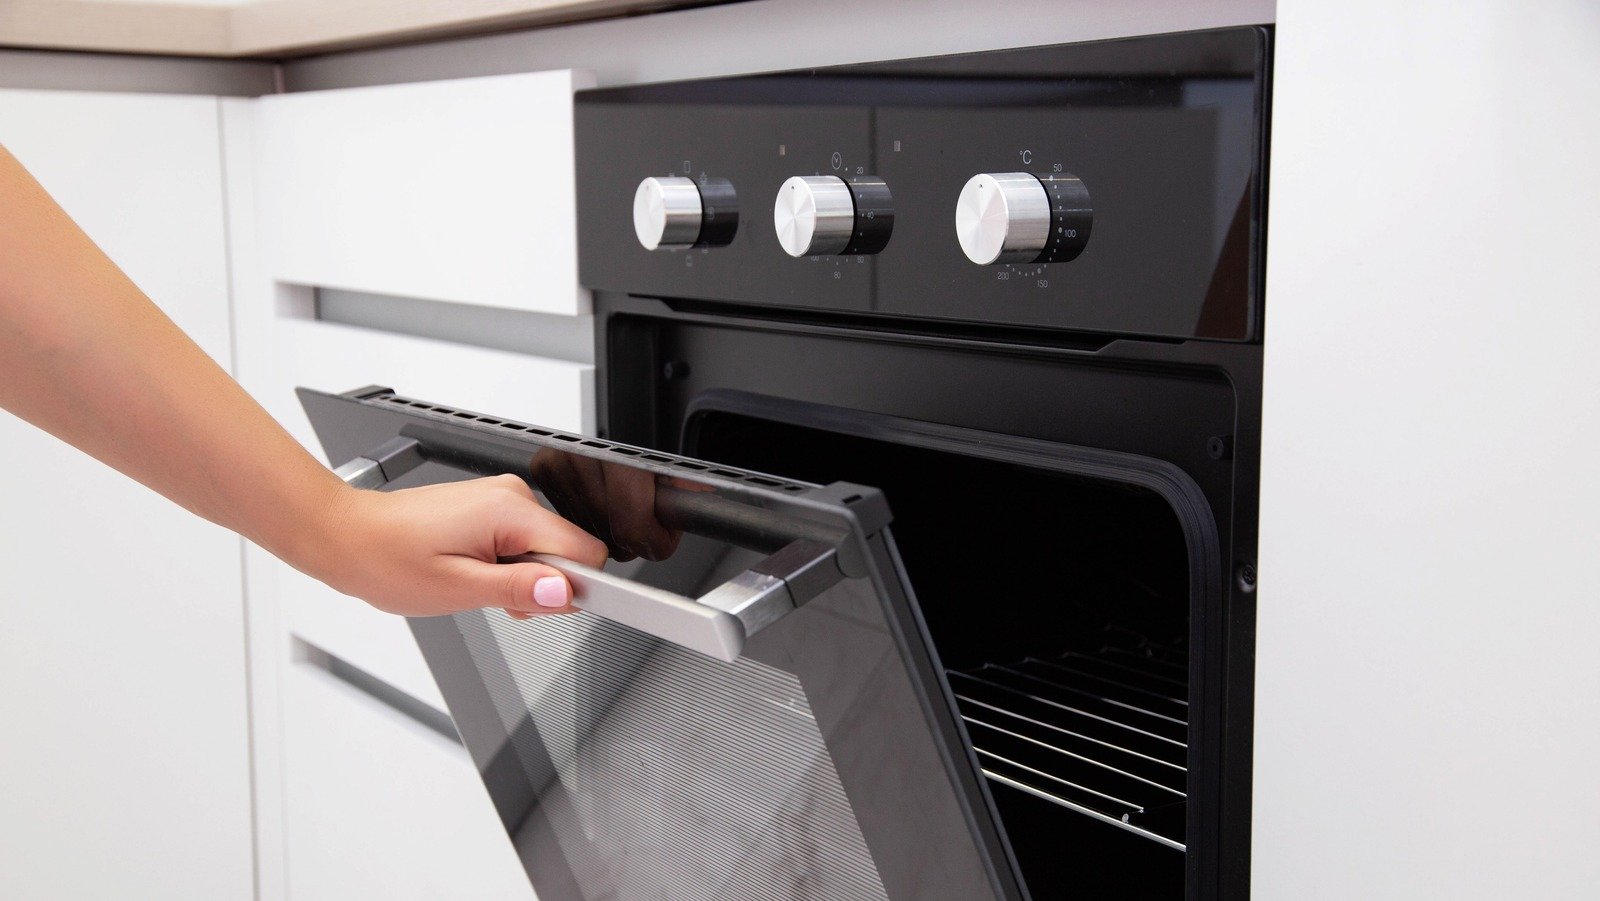 5 Unexpected Ways To Use Oven Cleaners Around The House